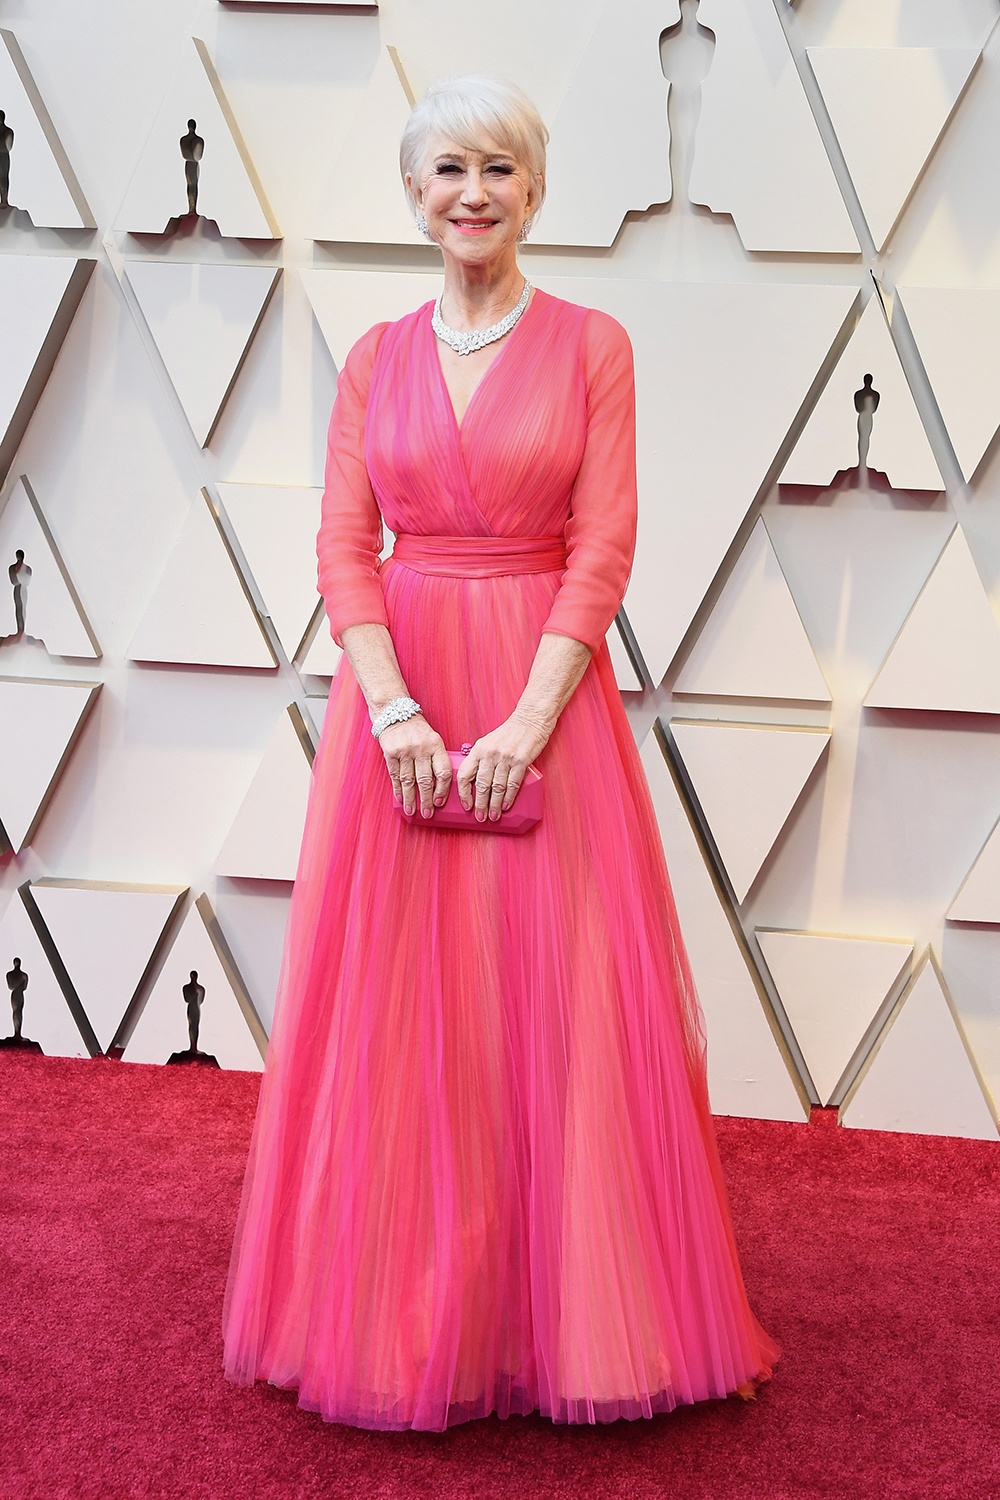 HOLLYWOOD, CA - FEBRUARY 24: Helen Mirren attends the 91st Annual Academy Awards at Hollywood and Highland on February 24, 2019 in Hollywood, California. (Photo by Steve Granitz/WireImage)